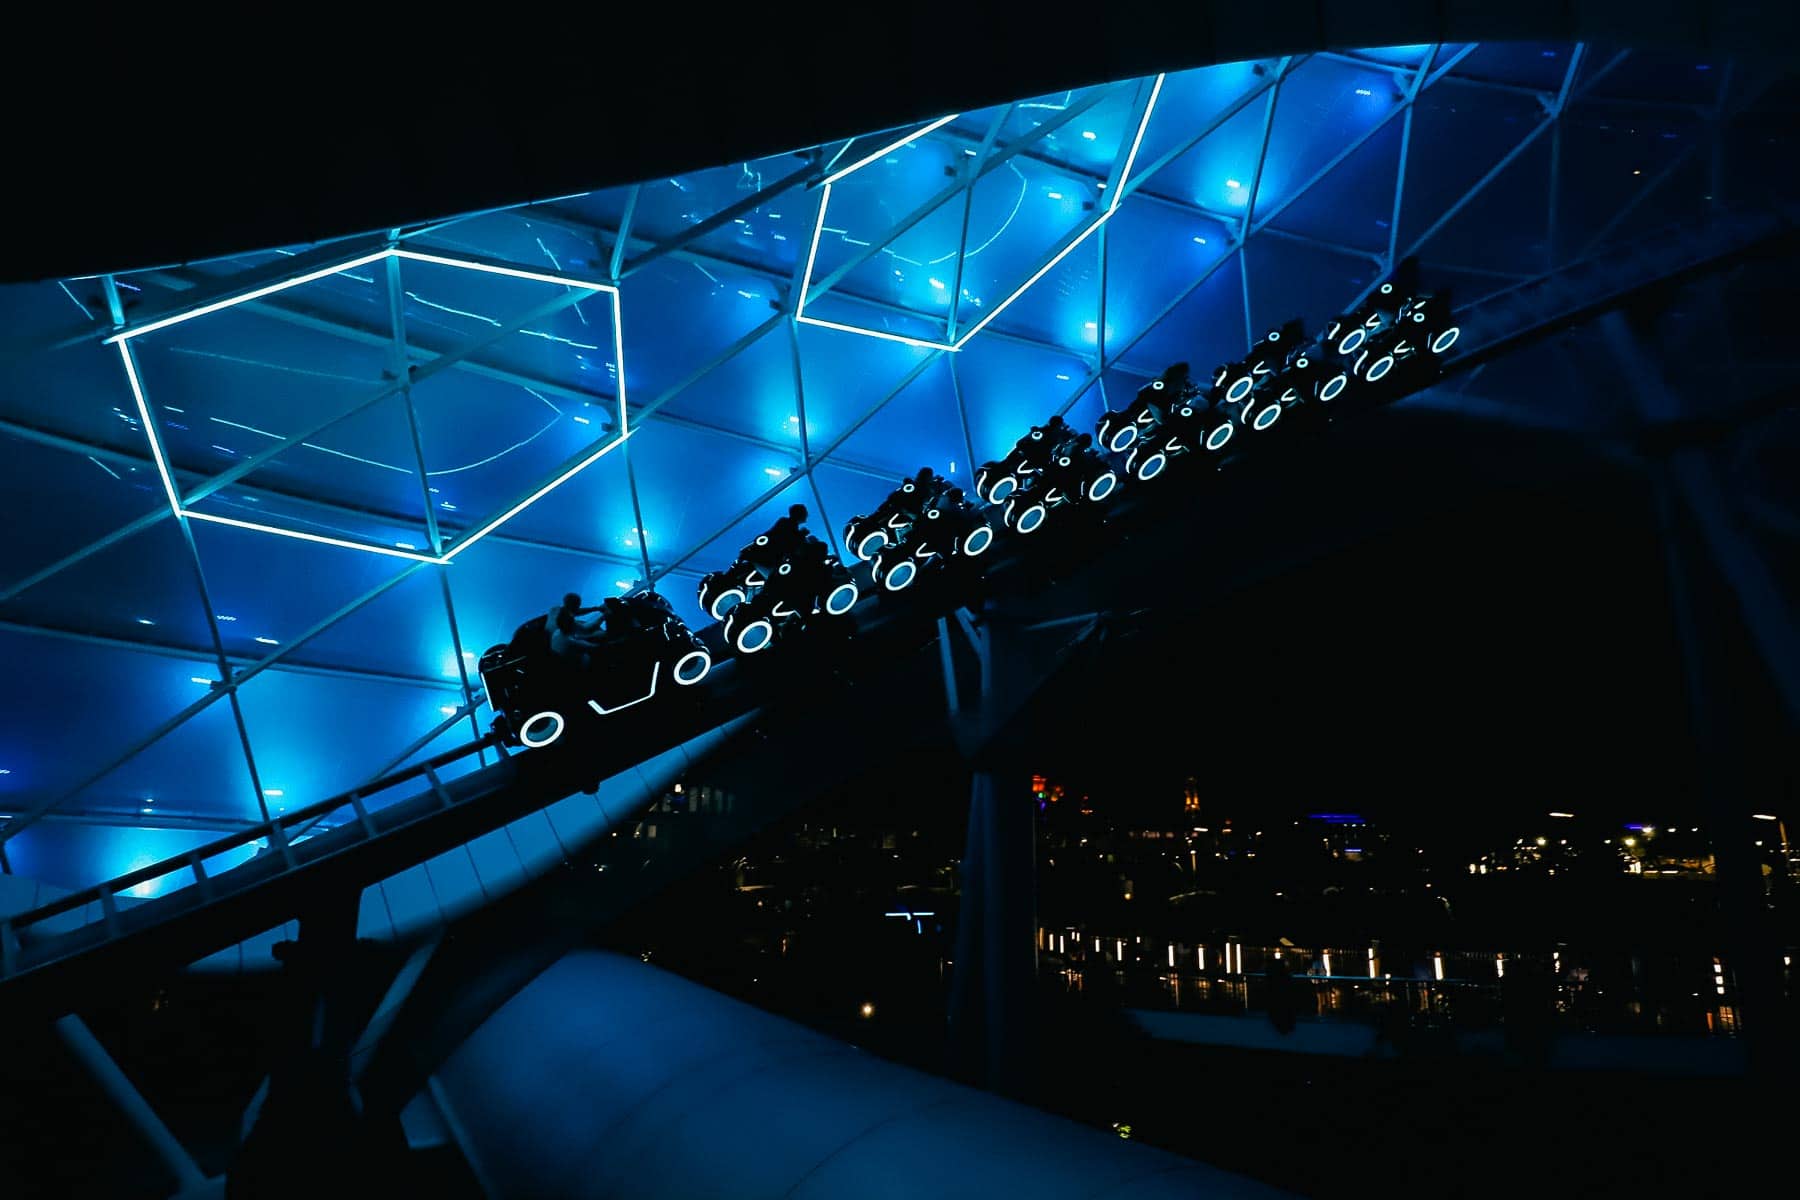 Guests riding Tron at night. 